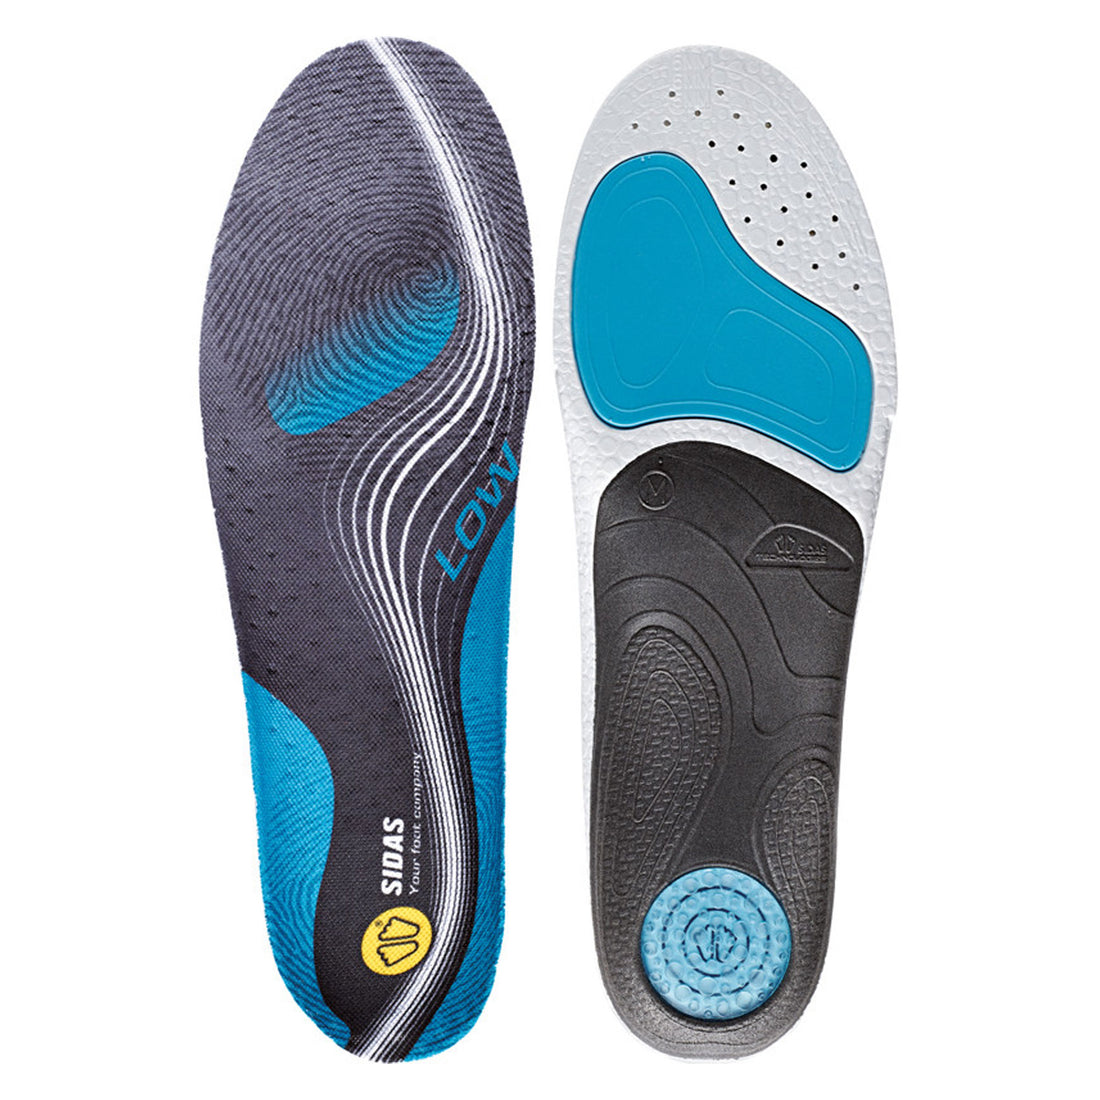 3feet Activ Low Insoles - Blue